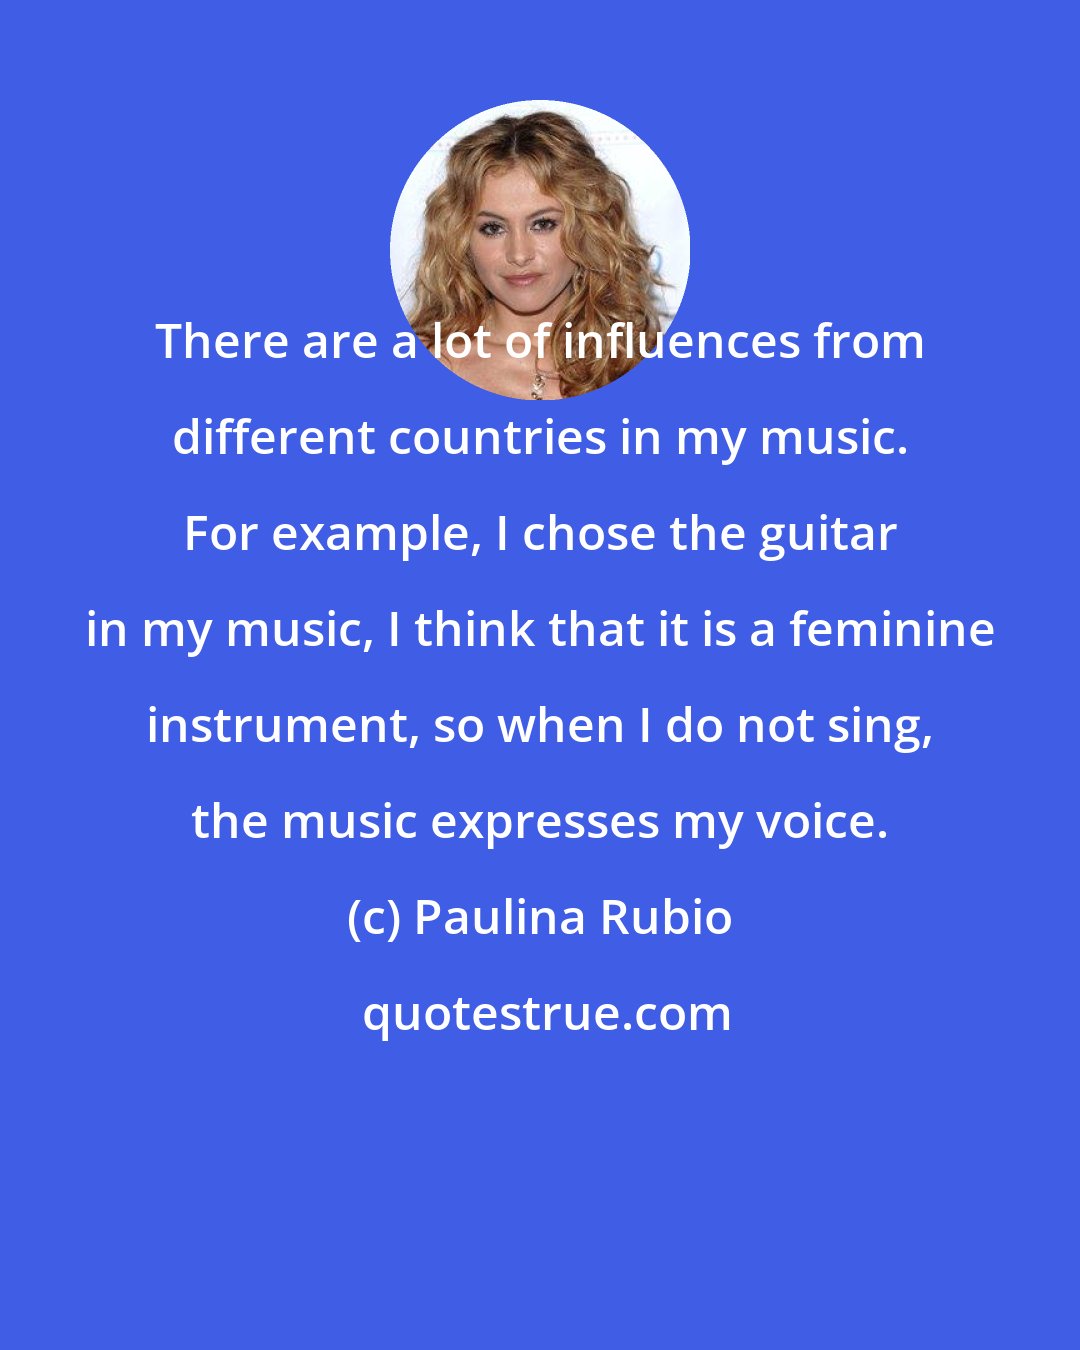 Paulina Rubio: There are a lot of influences from different countries in my music. For example, I chose the guitar in my music, I think that it is a feminine instrument, so when I do not sing, the music expresses my voice.